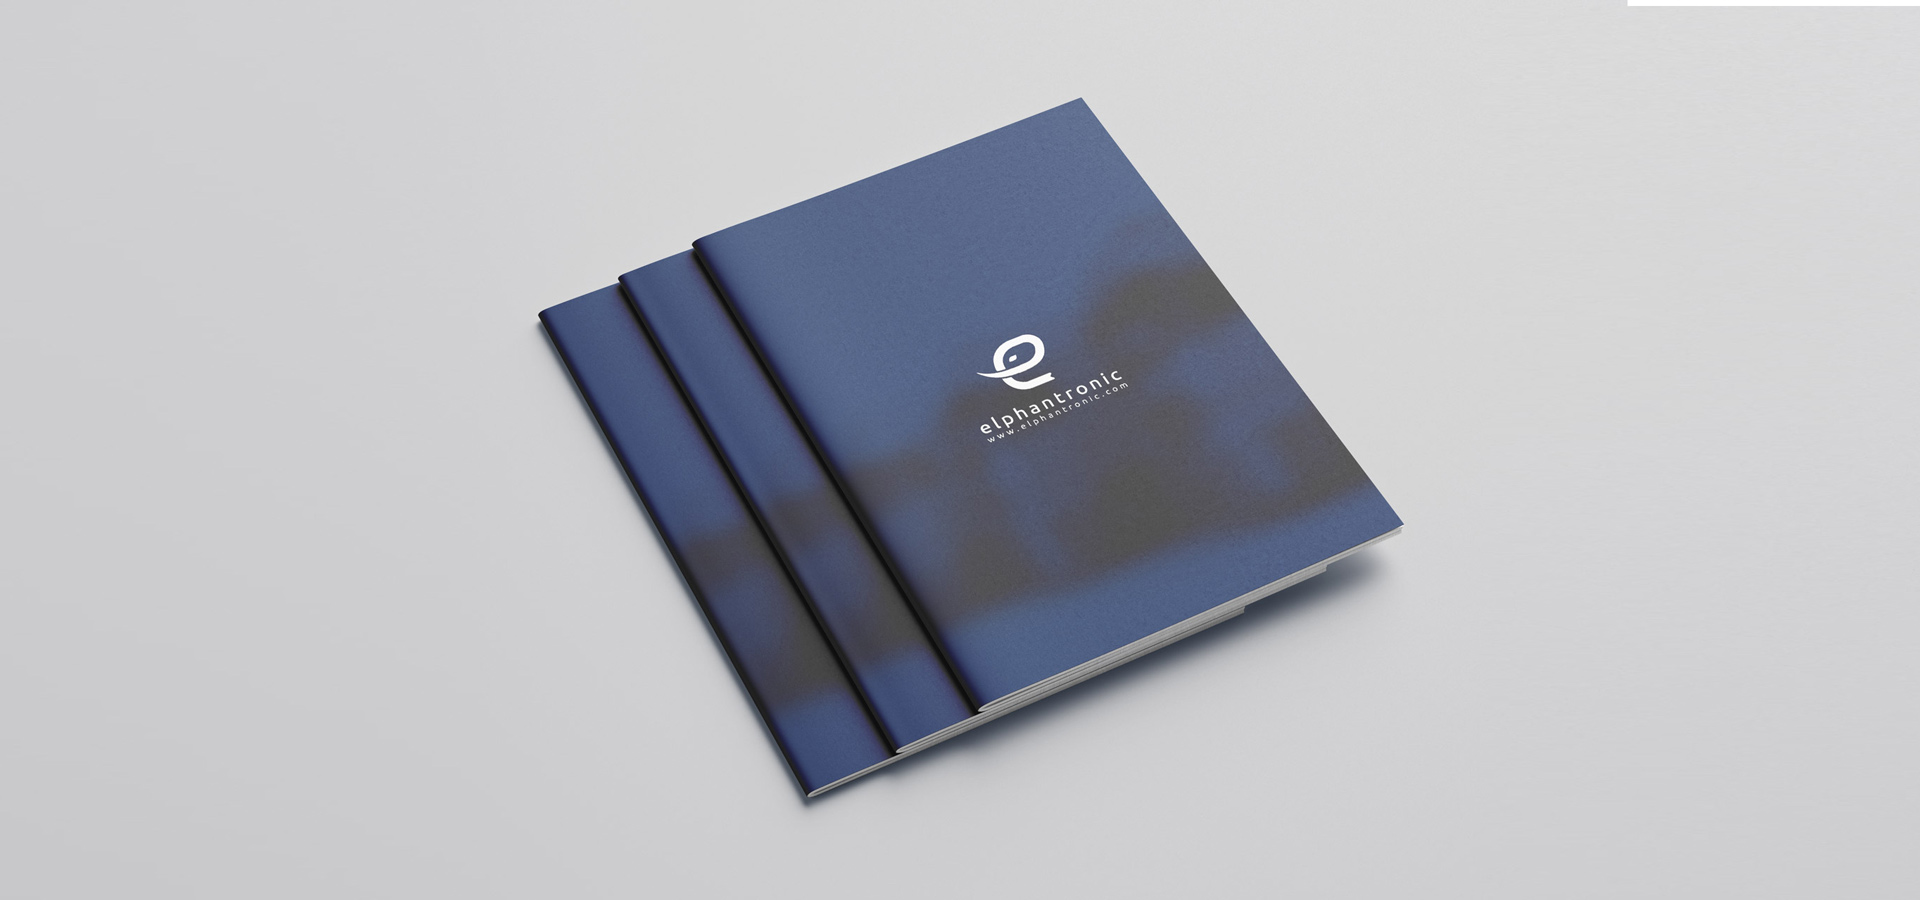 The cover of Elphantronic's Branbook, designed by Zhahoo Creative Agency.